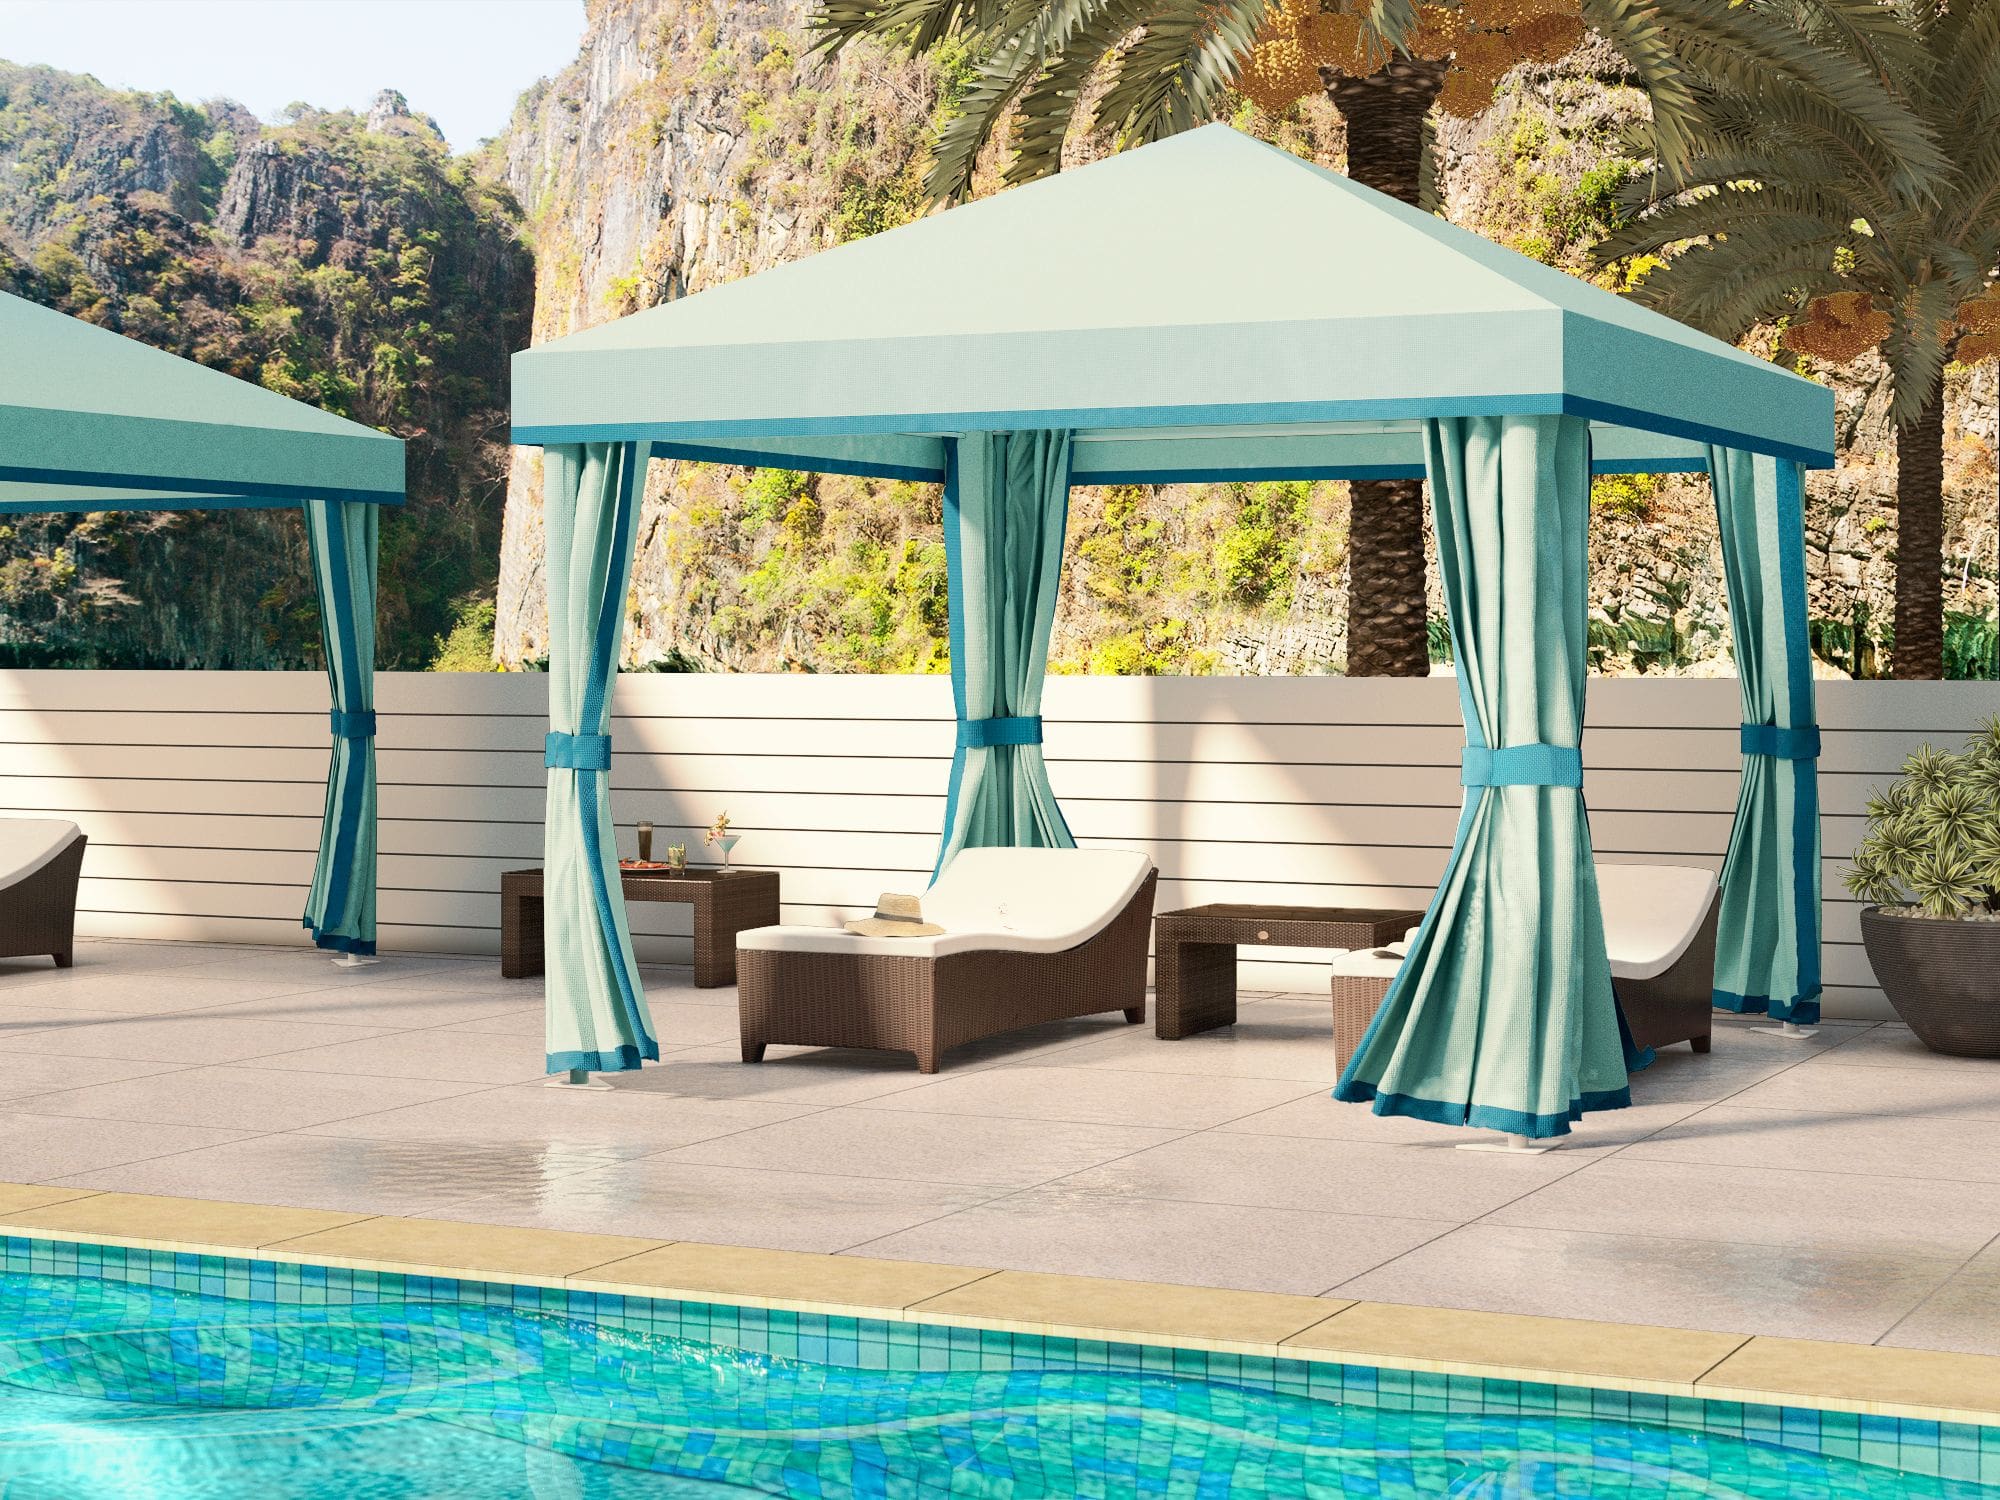 Academy Design's Presidential cabana, perspective view, emphasizing its corrosion-resistant 6061-T6 aluminum frame and elegant marine-grade fabric peaked roof with a hard valance. The mock curtains, crafted from marine-grade upholstery fabric, gracefully wrap around the cabana's posts, blending style and functionality for premium outdoor spaces.